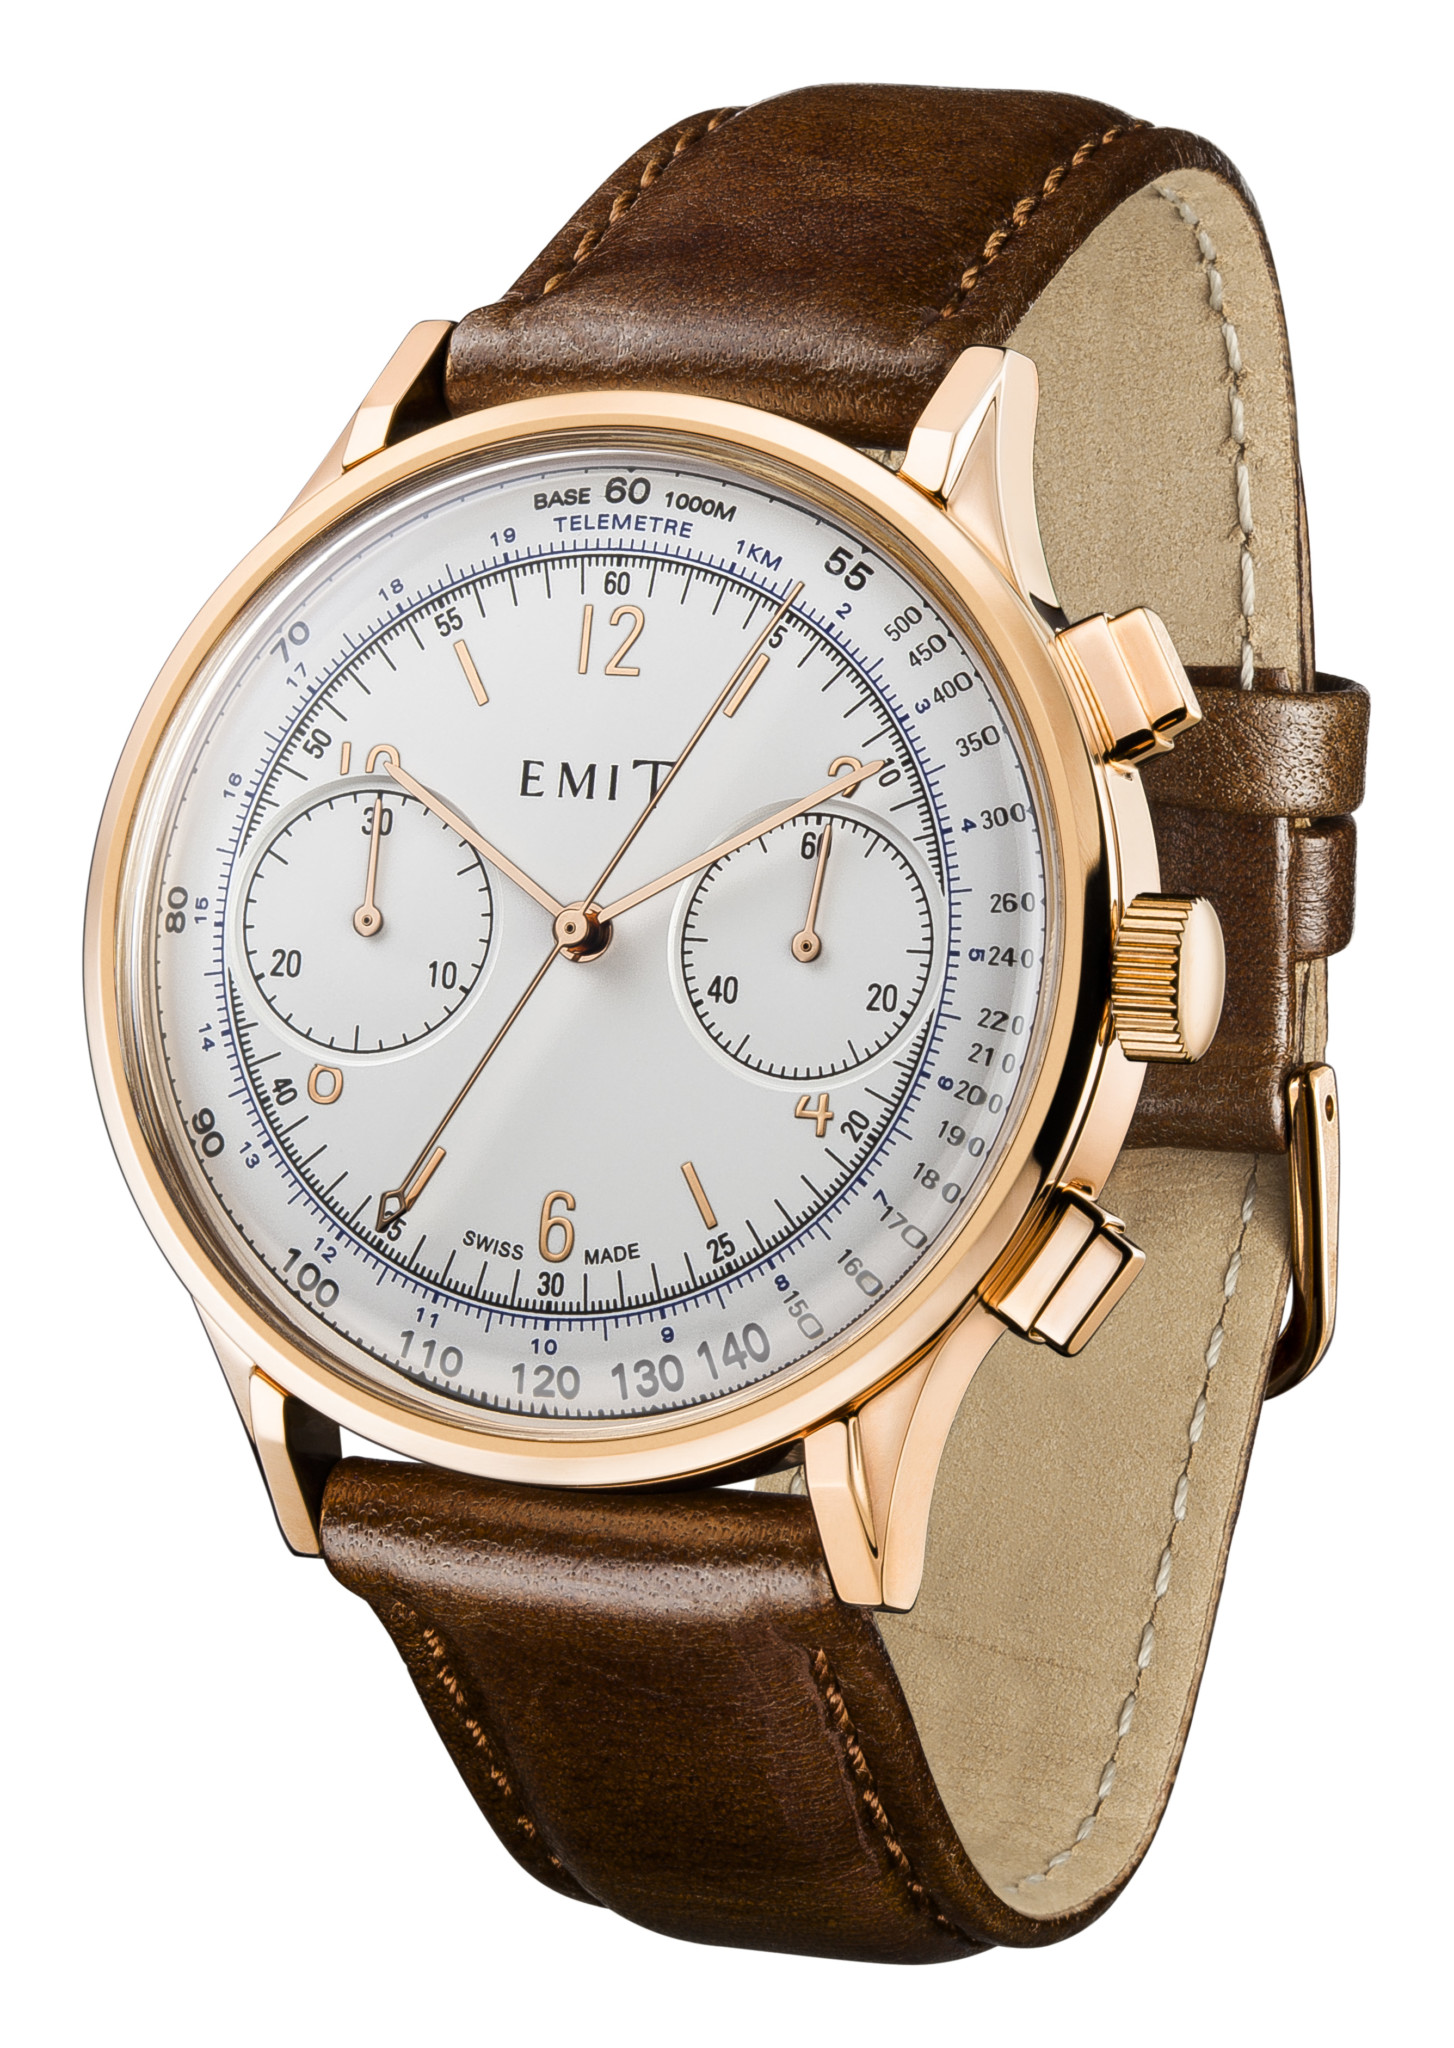 The tachymeter bezel, shown here on the swiss-made emit chronograph, is one of the key distinguishing features on iconic chronograph watches.